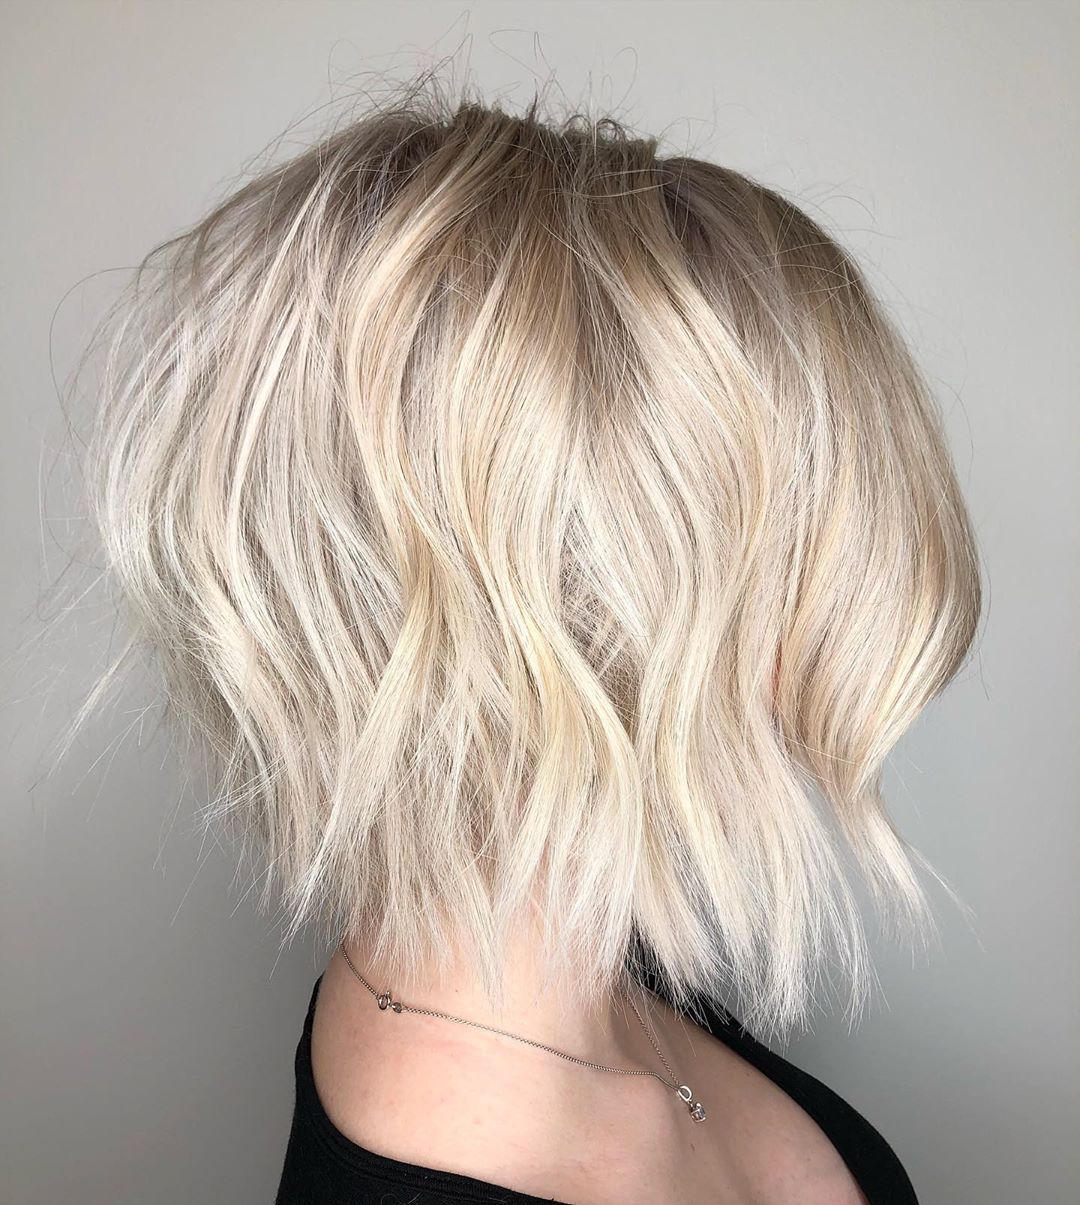 13 Popular Choppy Inverted Bob Haircuts to Consider Trying